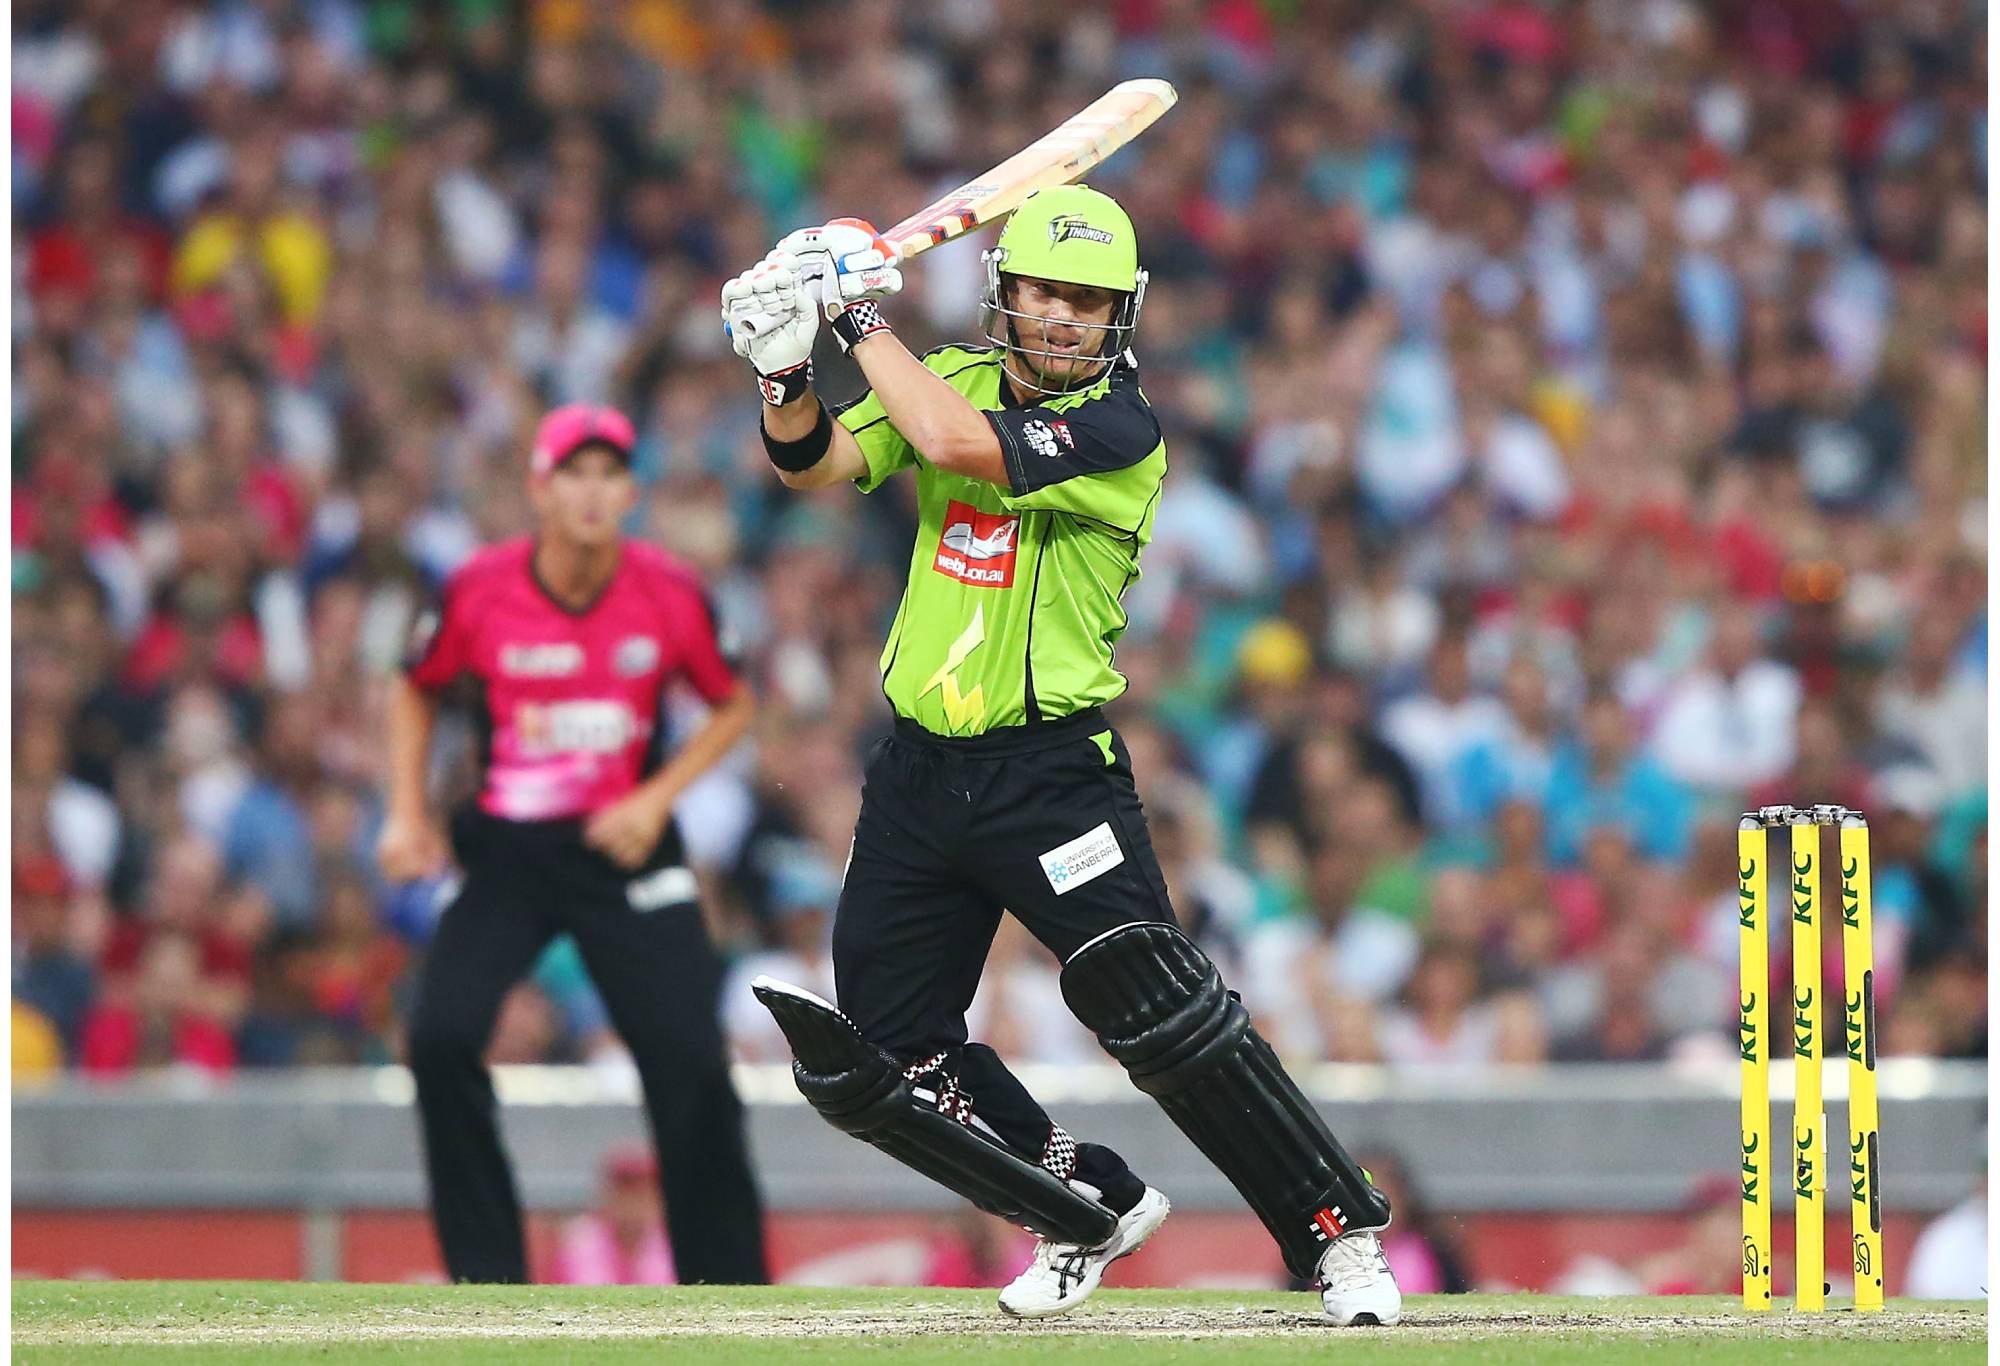 SYDNEY, AUSTRALIA - DECEMBER 21: David Warner of the Thunder plays a cut shot during the Big Bash League match between the Sydney Sixers and Sydney Thunder at SCG on December 21, 2013 in Sydney, Australia. (Photo by Matt King/Getty Images)